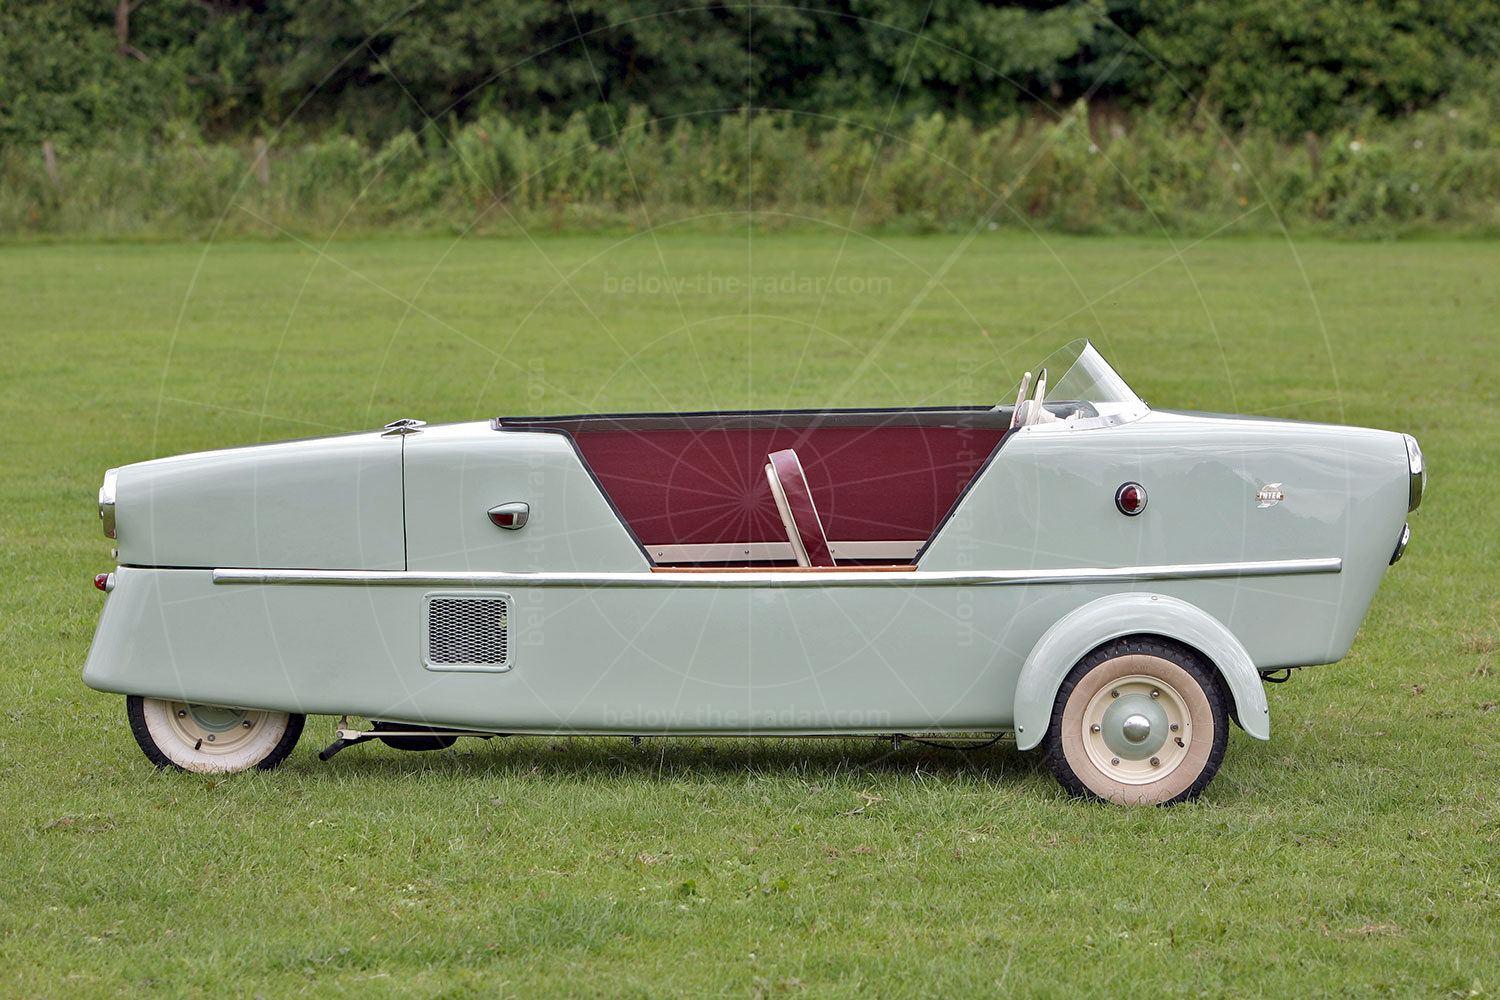 SNCAN Inter 175A Autoscooter Torpedo Pic: magiccarpics.co.uk | SNCAN Inter 175A Autoscooter Torpedo